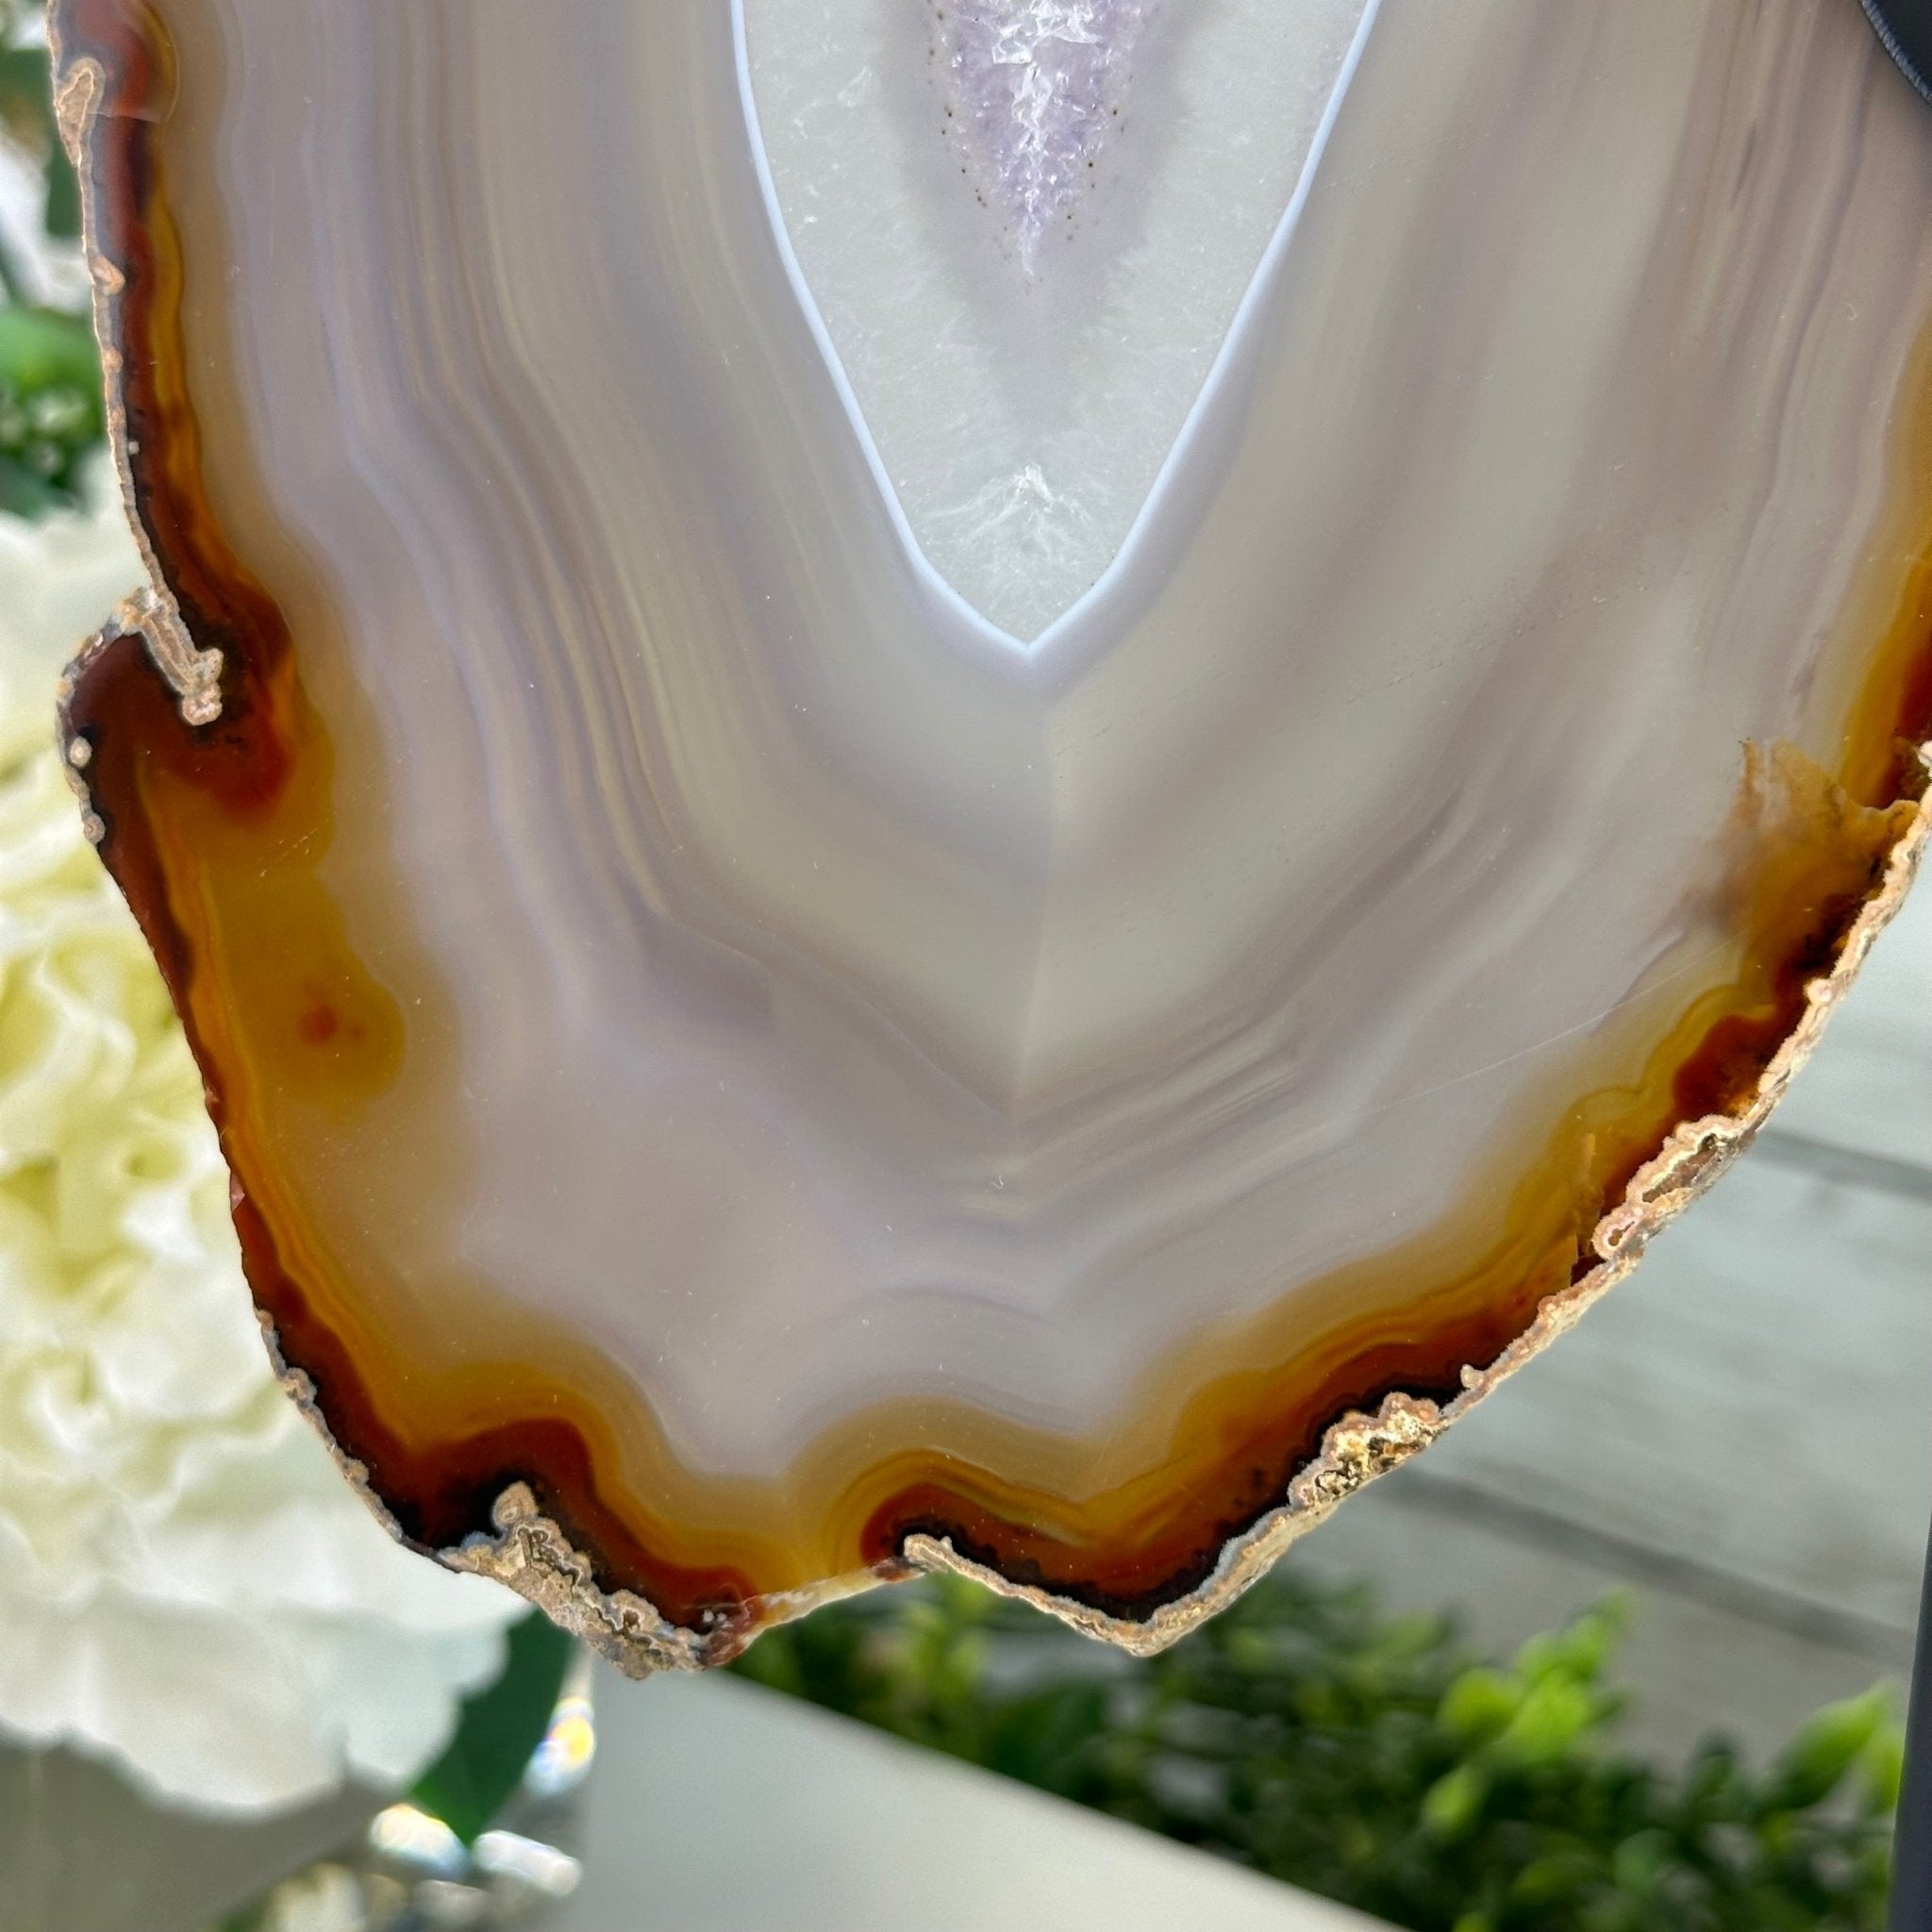 Natural Brazilian Agate "Butterfly Wings", 15" Tall #5050NA-085 - Brazil GemsBrazil GemsNatural Brazilian Agate "Butterfly Wings", 15" Tall #5050NA-085Agate Butterfly Wings5050NA-085